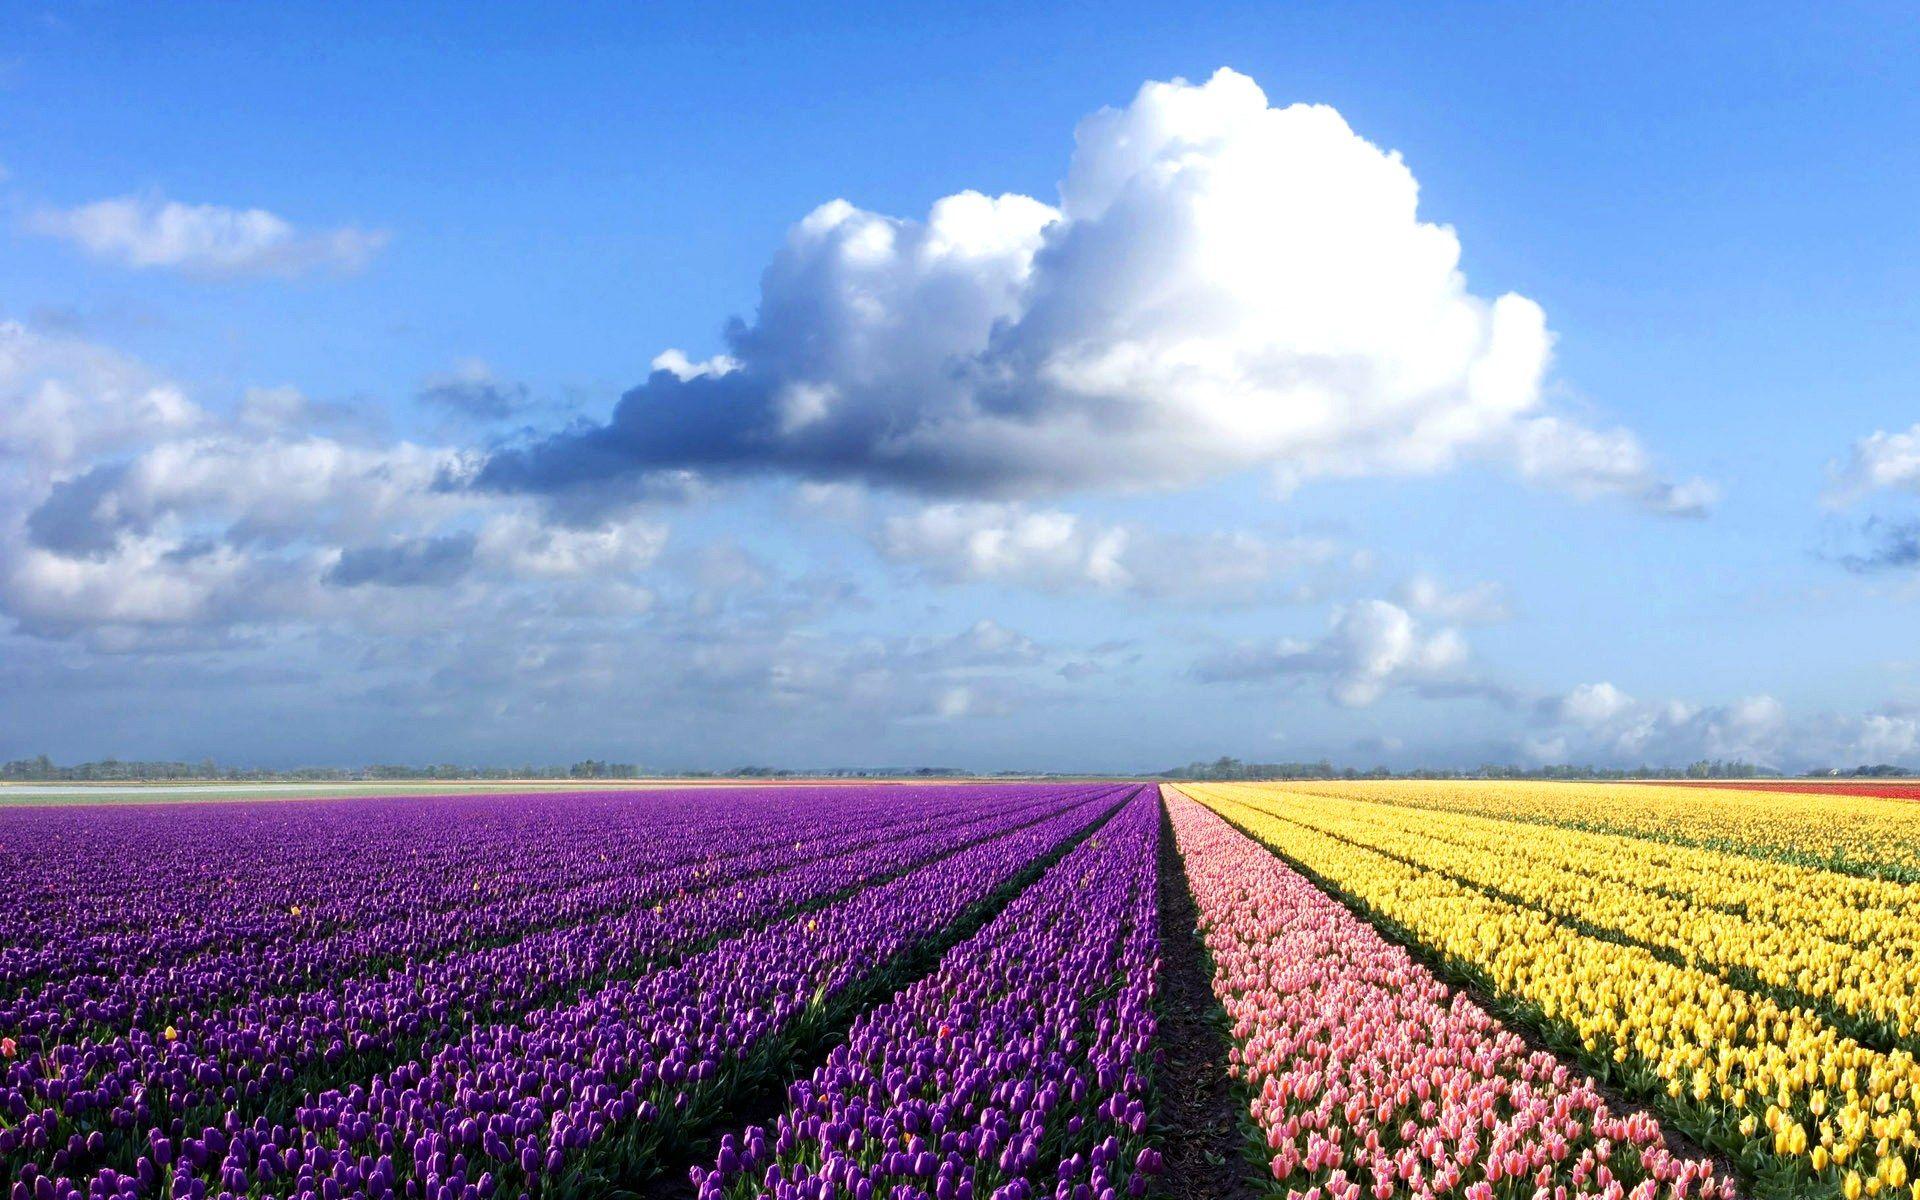 Colorful fields of tulips purple, pink & yellow under a